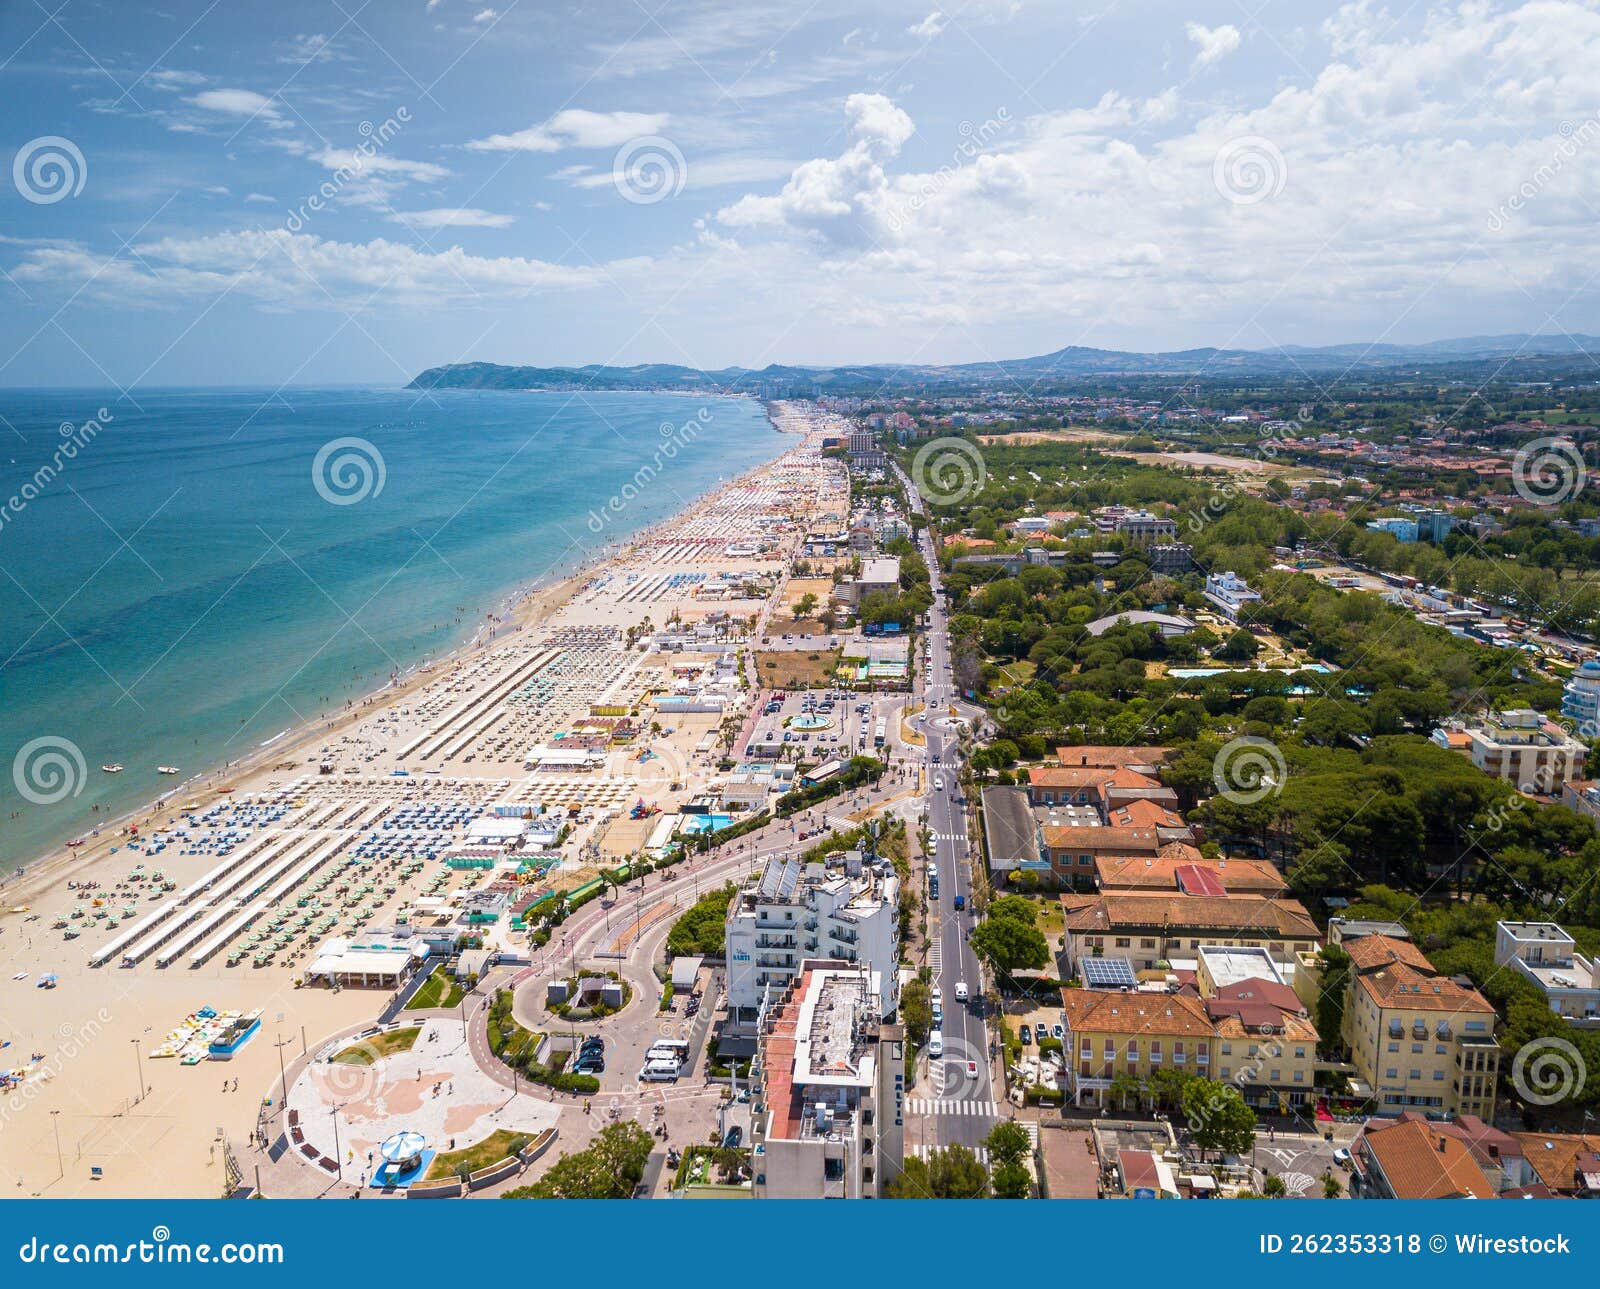 aerial view of the romagna coast with the beaches of riccione, rimini and cattolica